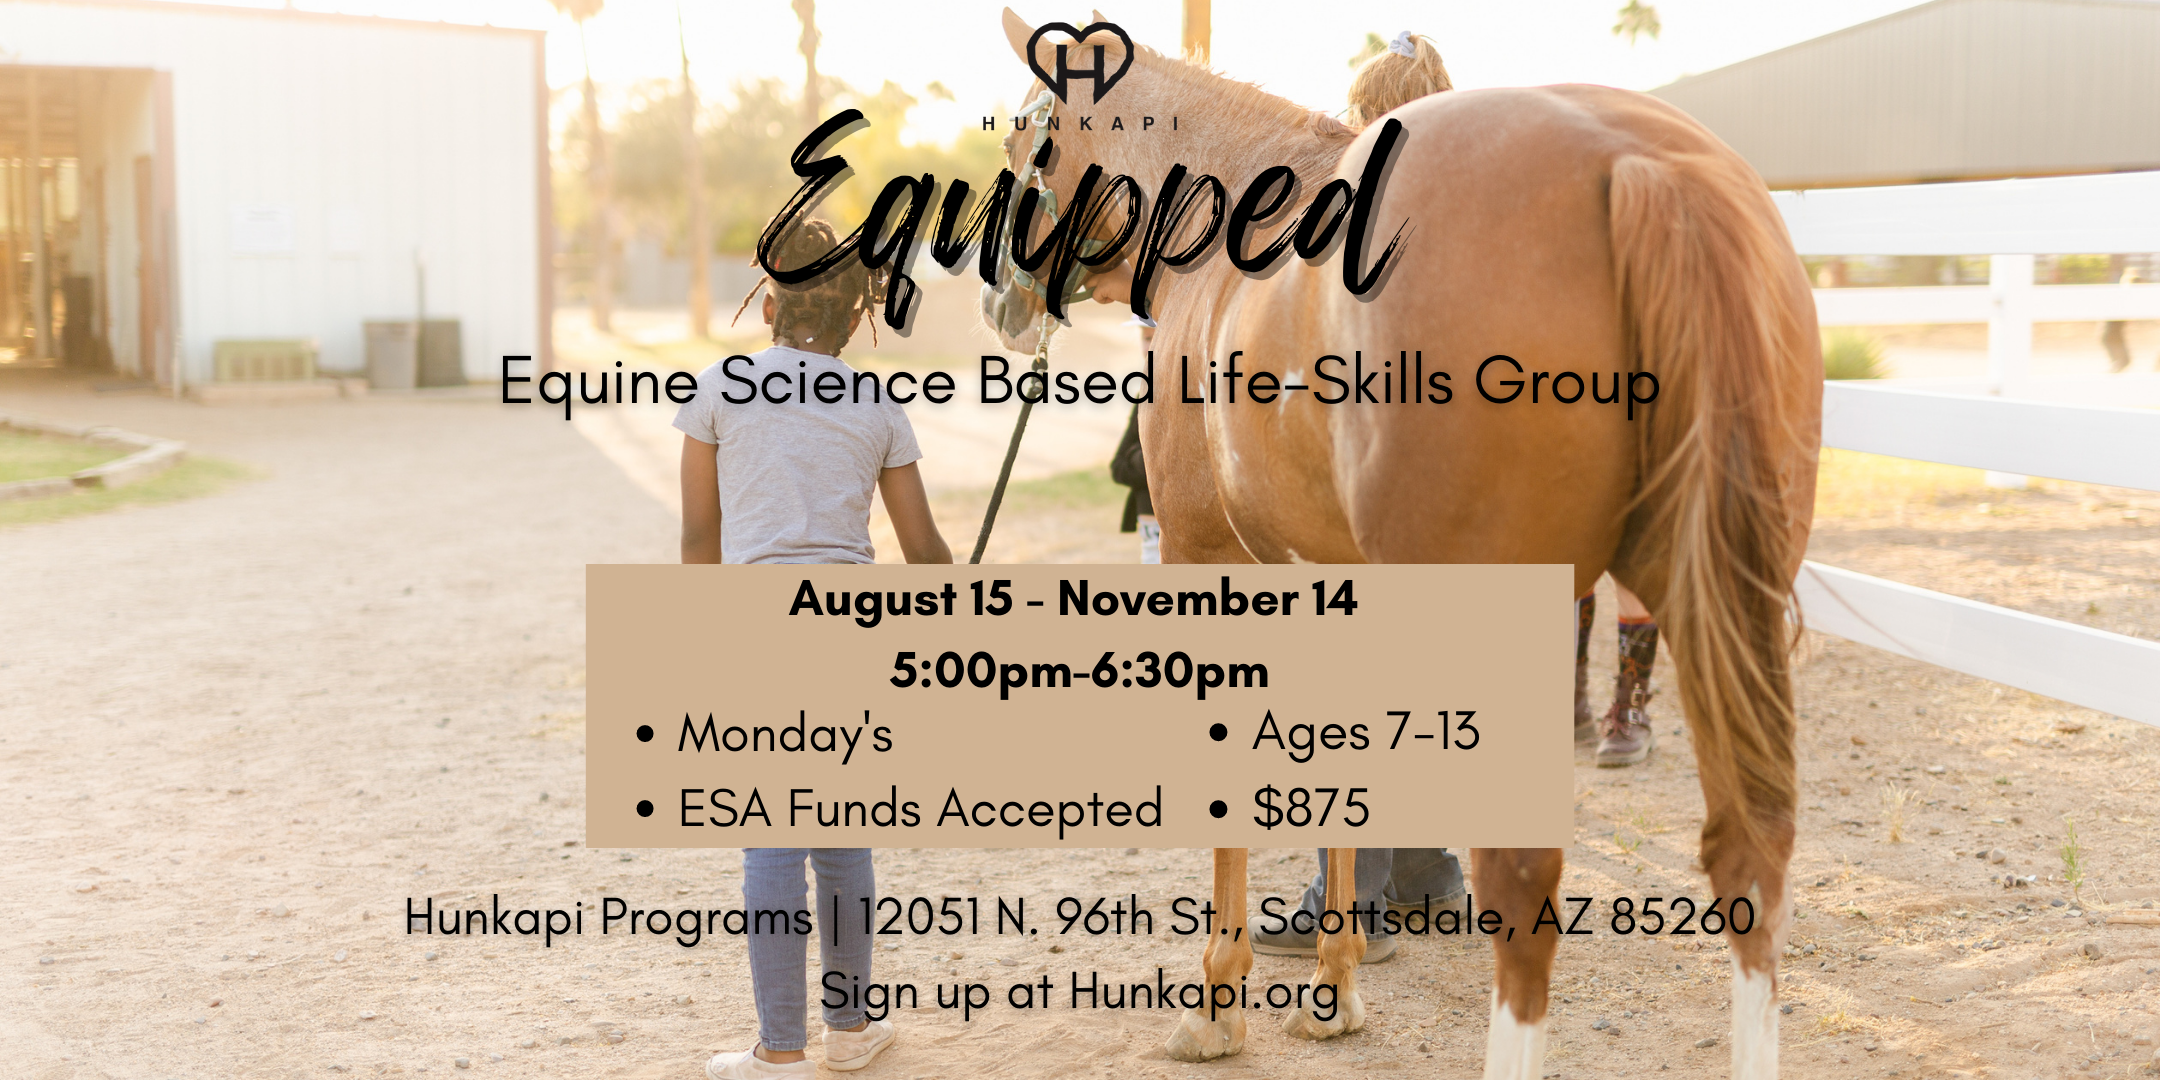 Equipped - Equine Science Based Life-Skills Group